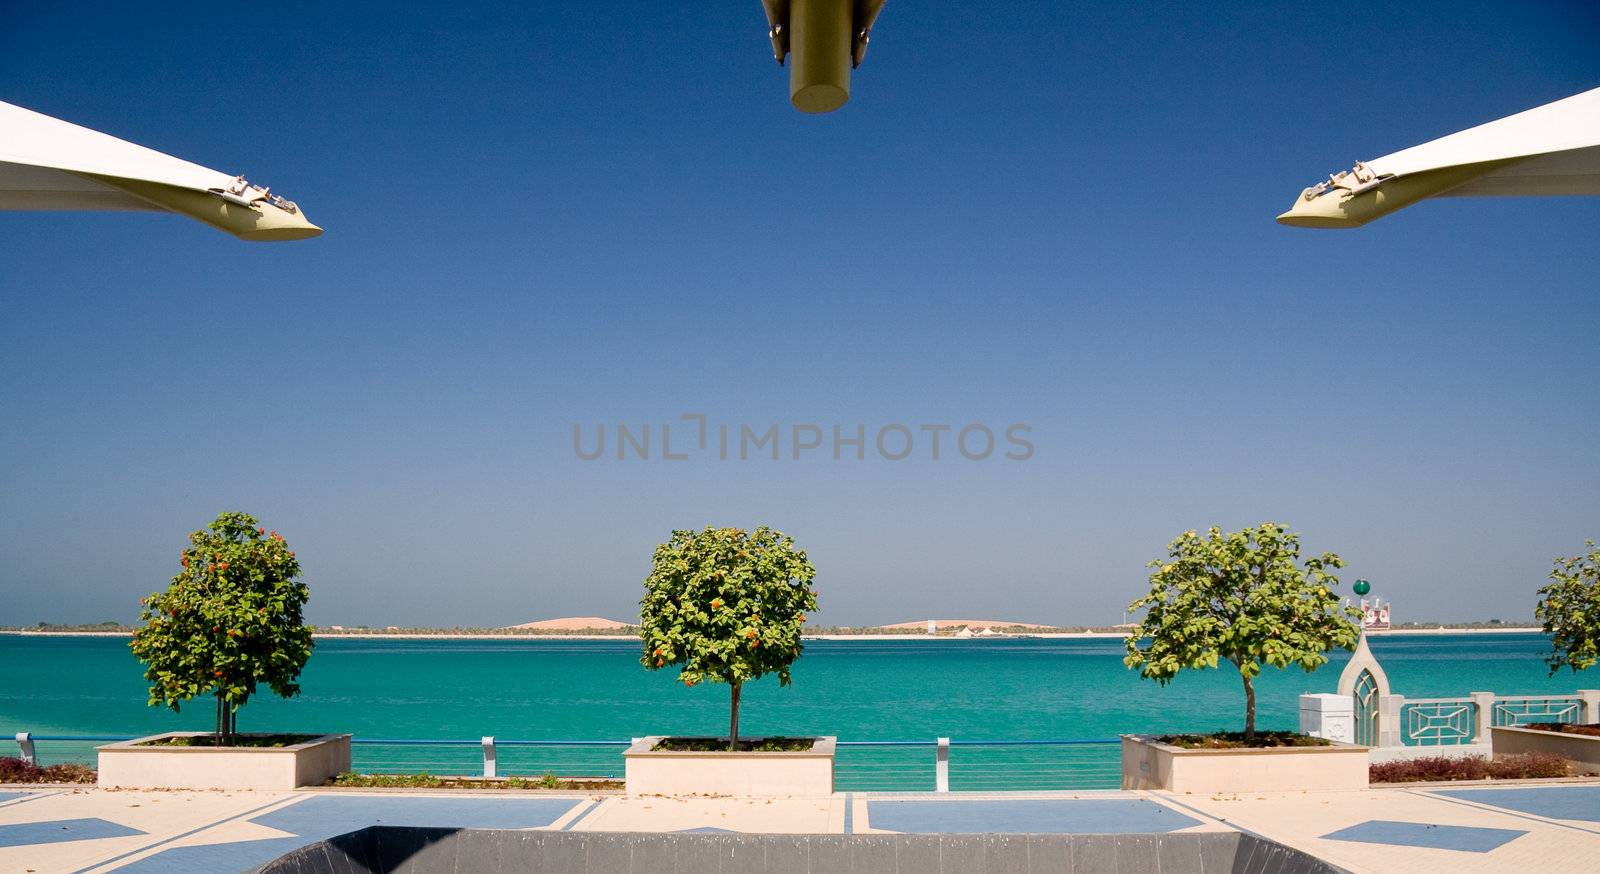 Trees and gulf in Abu Dhabi by steheap